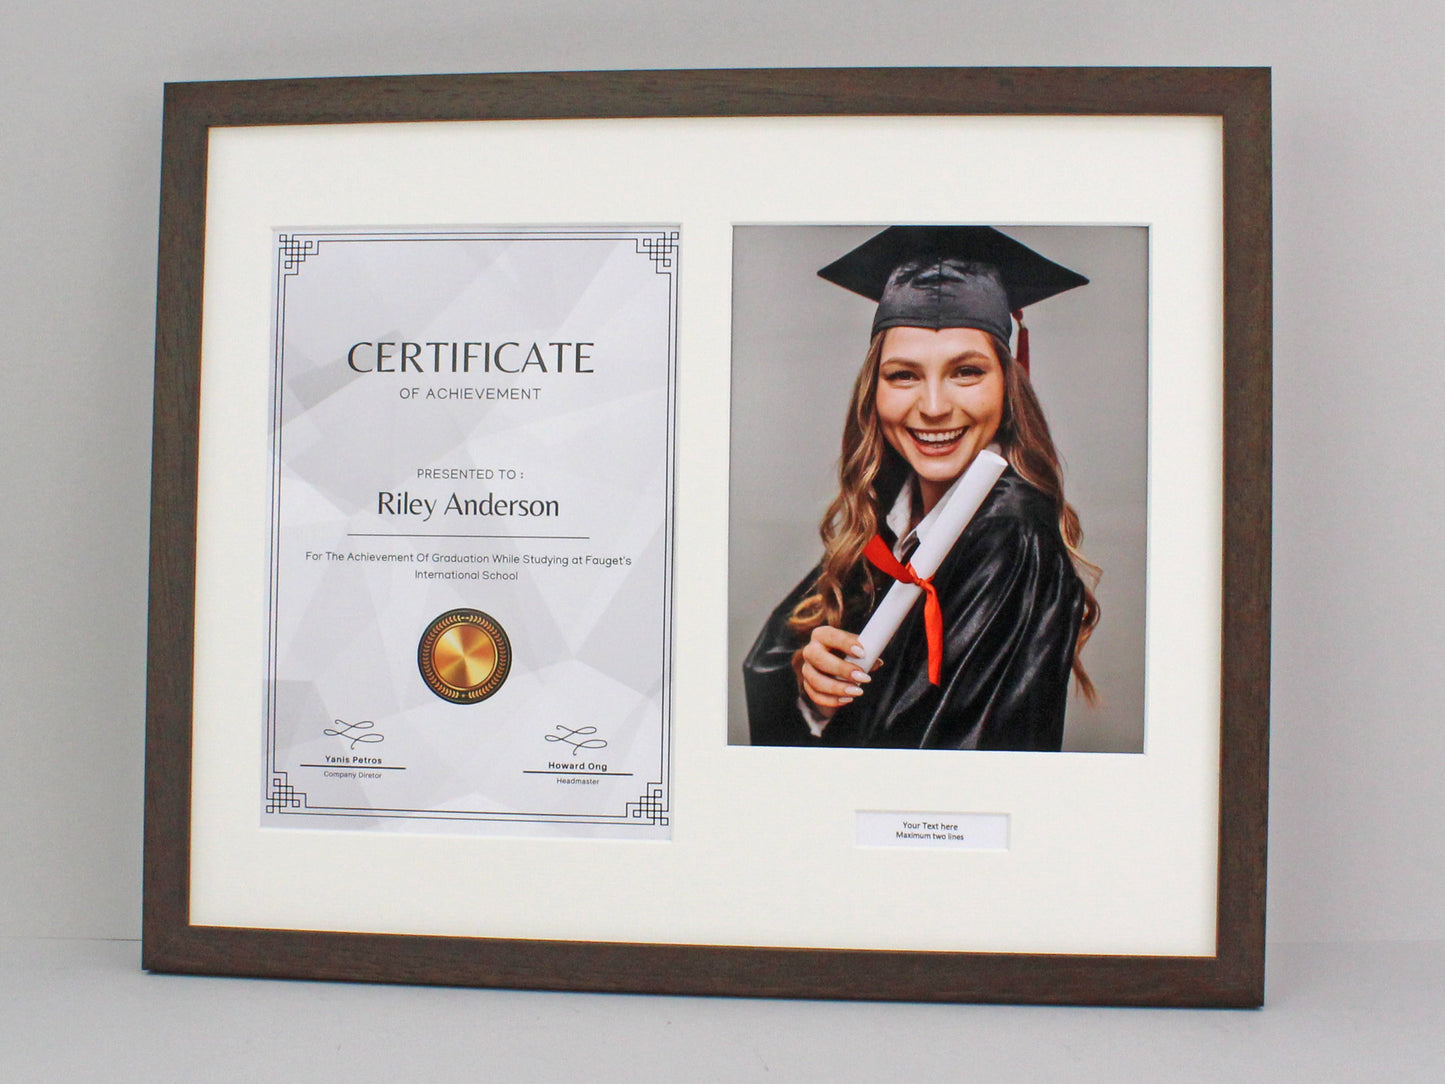 Personalised Certificate, Graduation, Diploma Frame with Photo. Suits an A4 Sized Certificate/image and a 10x8" Photo. - PhotoFramesandMore - Wooden Picture Frames